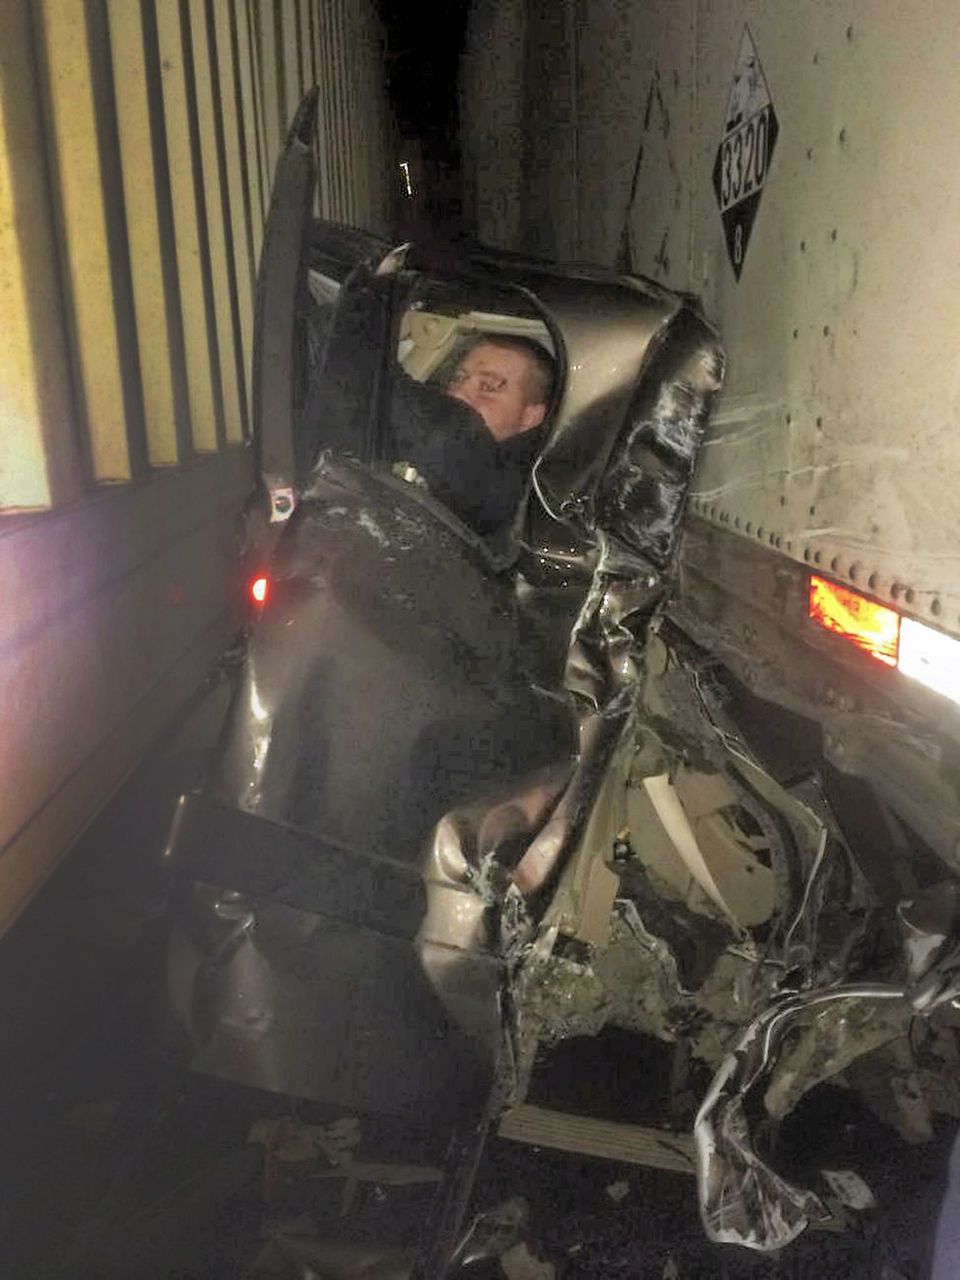 Unreal pic of a pick-up sandwiched between two semi-trucks, driver miraculously survived with no serious injuries- Kaleb Whitby, 27, who miraculously escaped with minor injuries, was sandwiched in his pickup truck between two trailers in the Baker City crash. The photographer, Sergi Karplyuk, helped the man out of his car. Whitby's injuries only required two band-aids and ice.